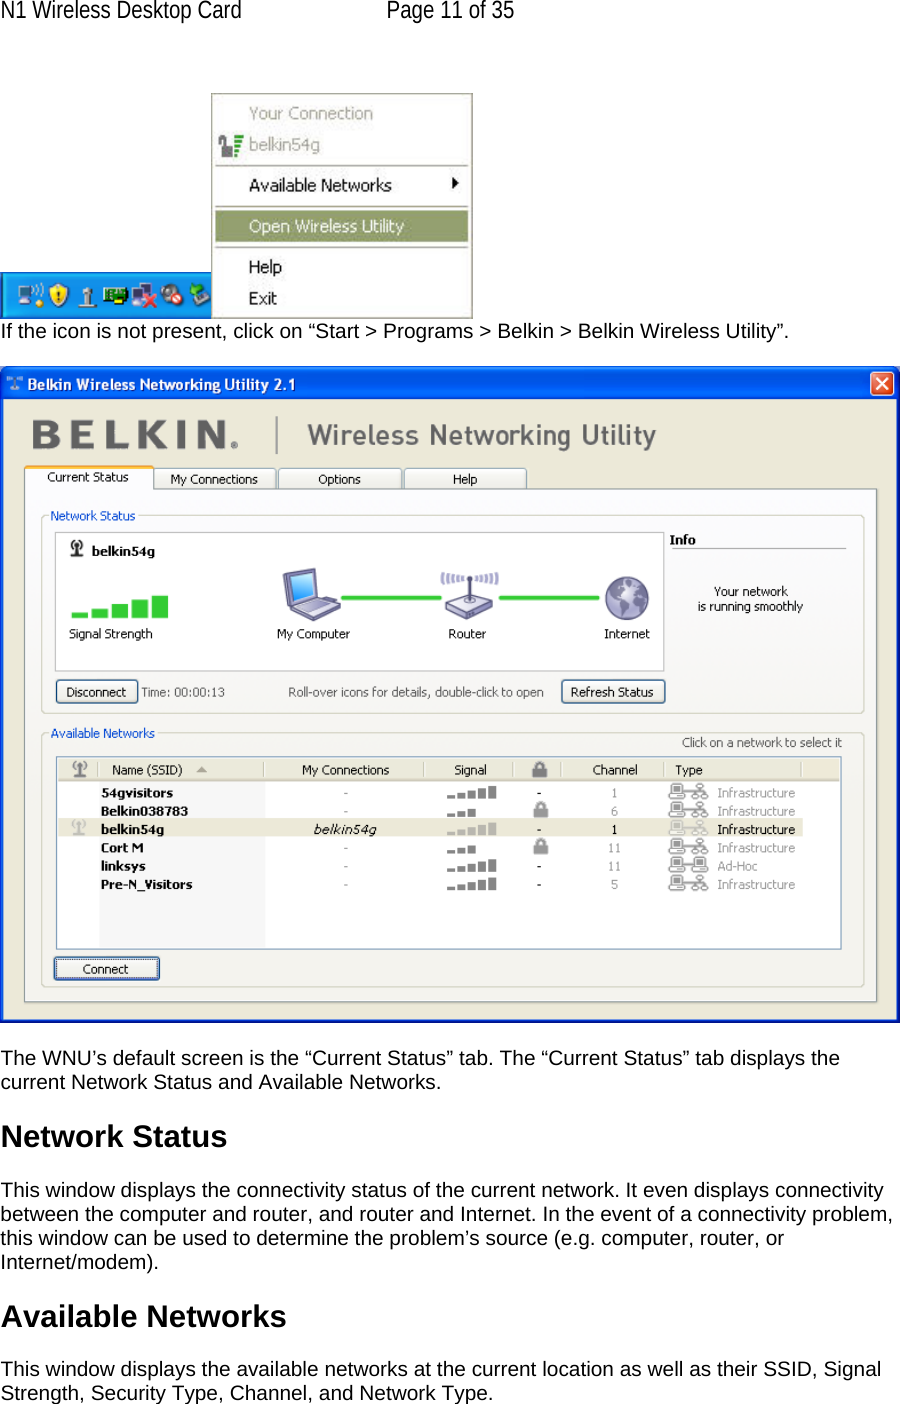 N1 Wireless Desktop Card  Page 11 of 35   If the icon is not present, click on “Start &gt; Programs &gt; Belkin &gt; Belkin Wireless Utility”.    The WNU’s default screen is the “Current Status” tab. The “Current Status” tab displays the current Network Status and Available Networks.  Network Status  This window displays the connectivity status of the current network. It even displays connectivity between the computer and router, and router and Internet. In the event of a connectivity problem, this window can be used to determine the problem’s source (e.g. computer, router, or Internet/modem).  Available Networks  This window displays the available networks at the current location as well as their SSID, Signal Strength, Security Type, Channel, and Network Type. 